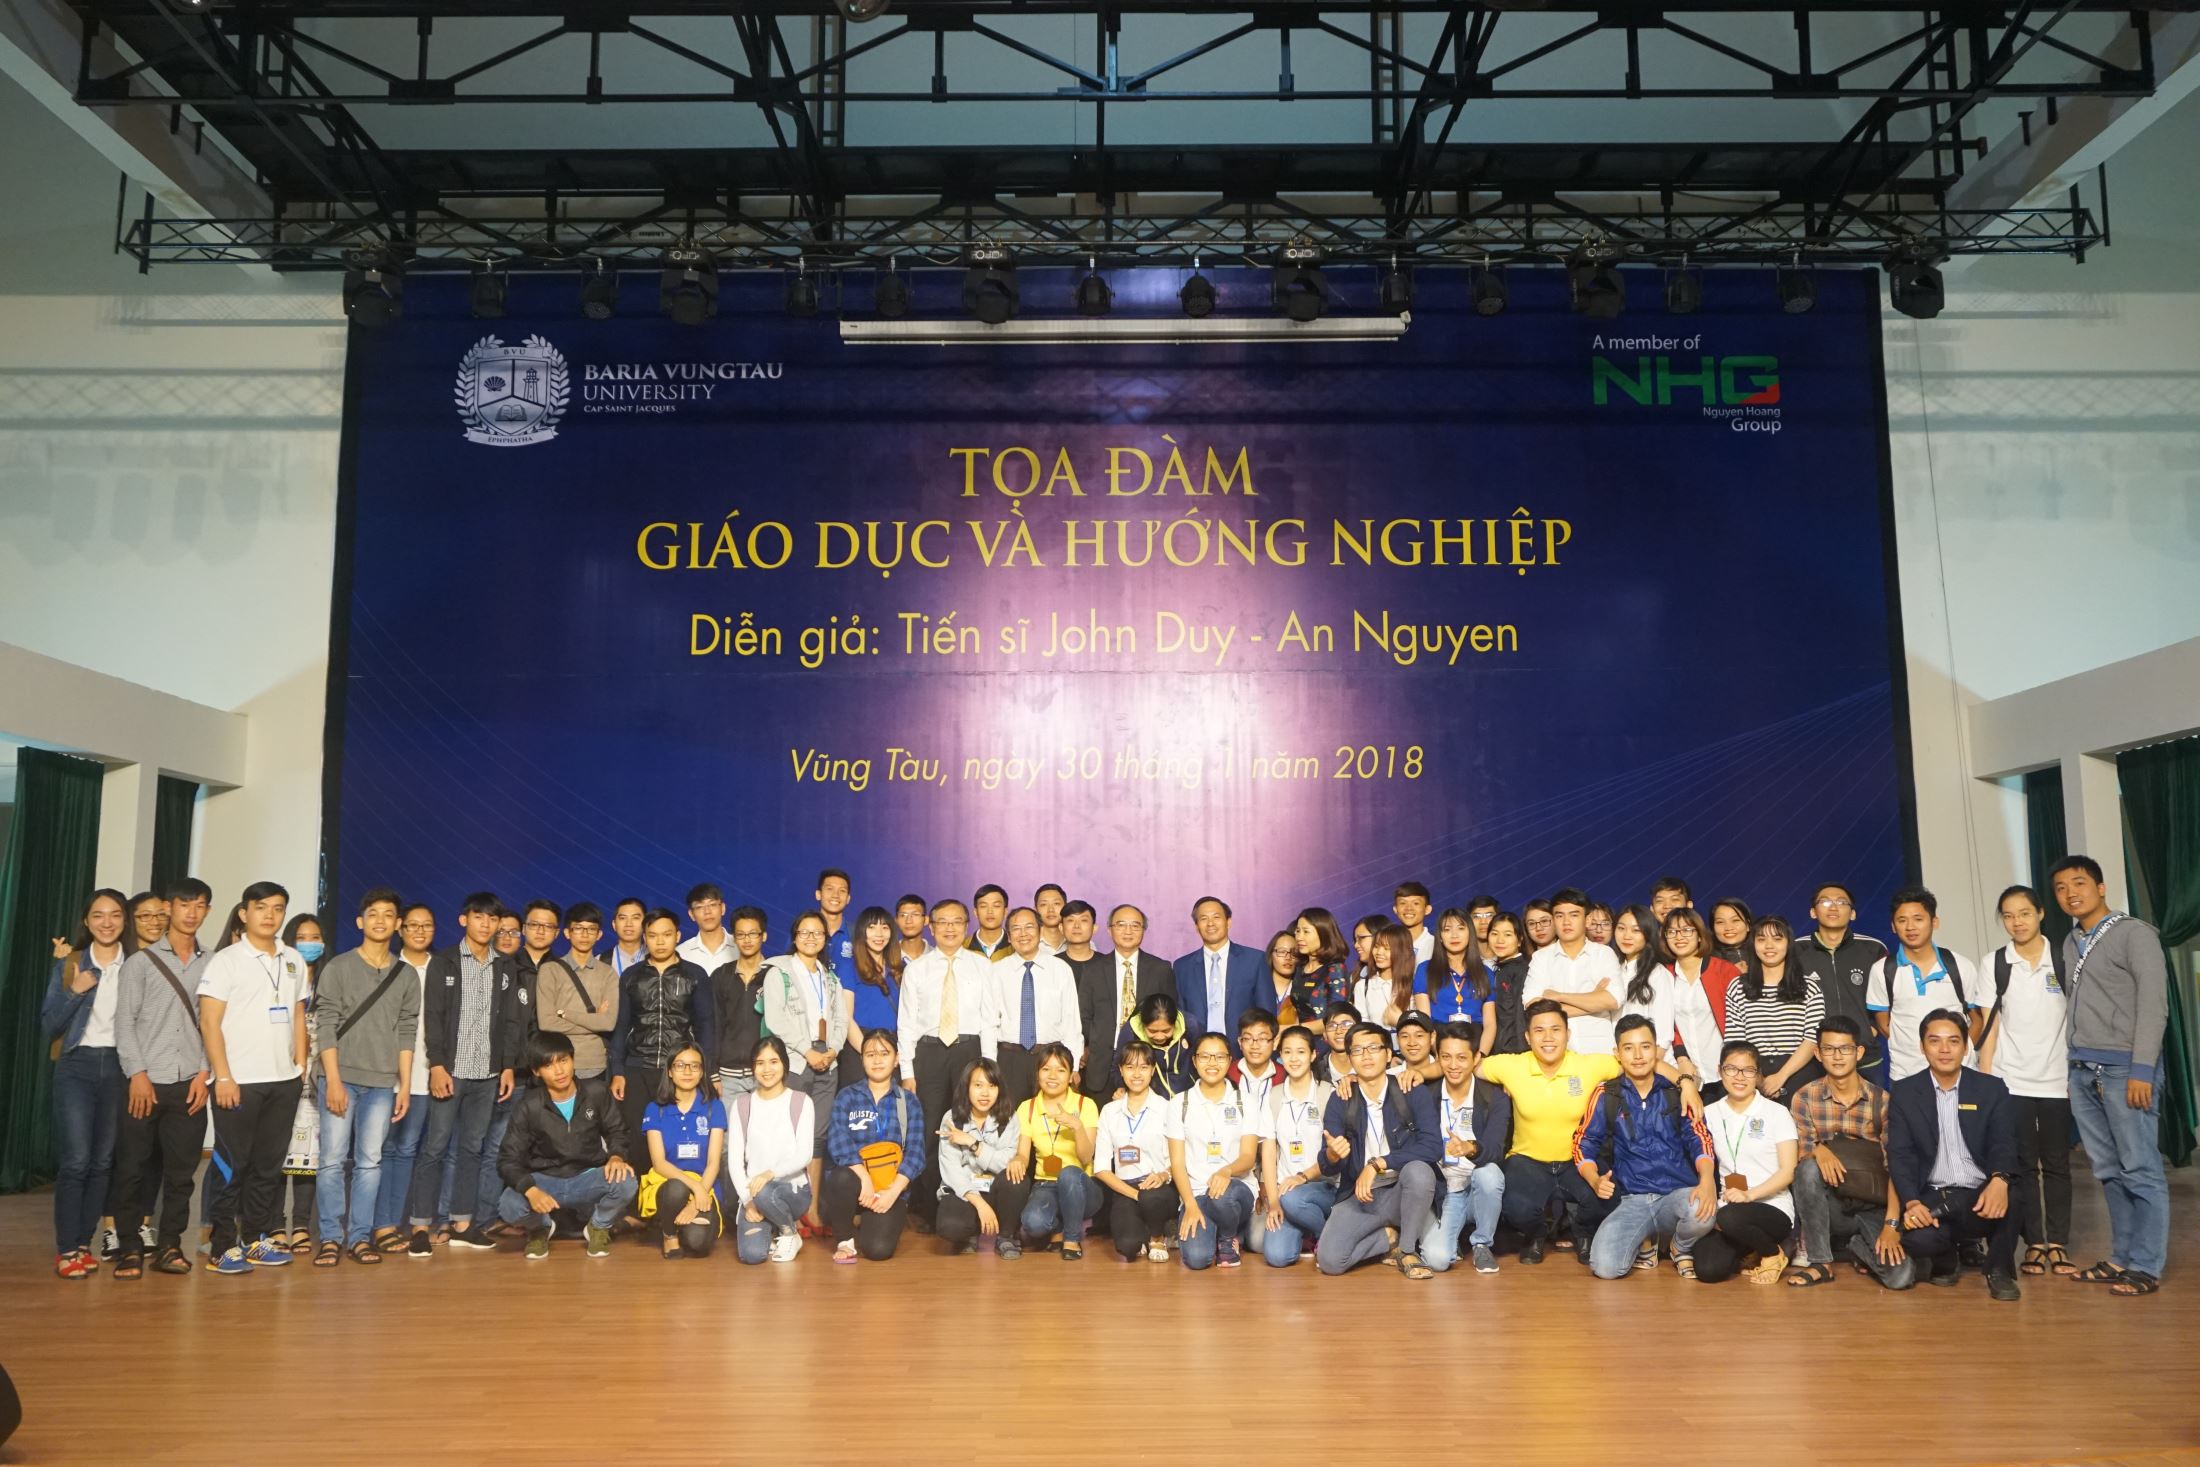 Dr. John Duy-An Nguyen together with NHG representatives and BVU students took memorable pictures 